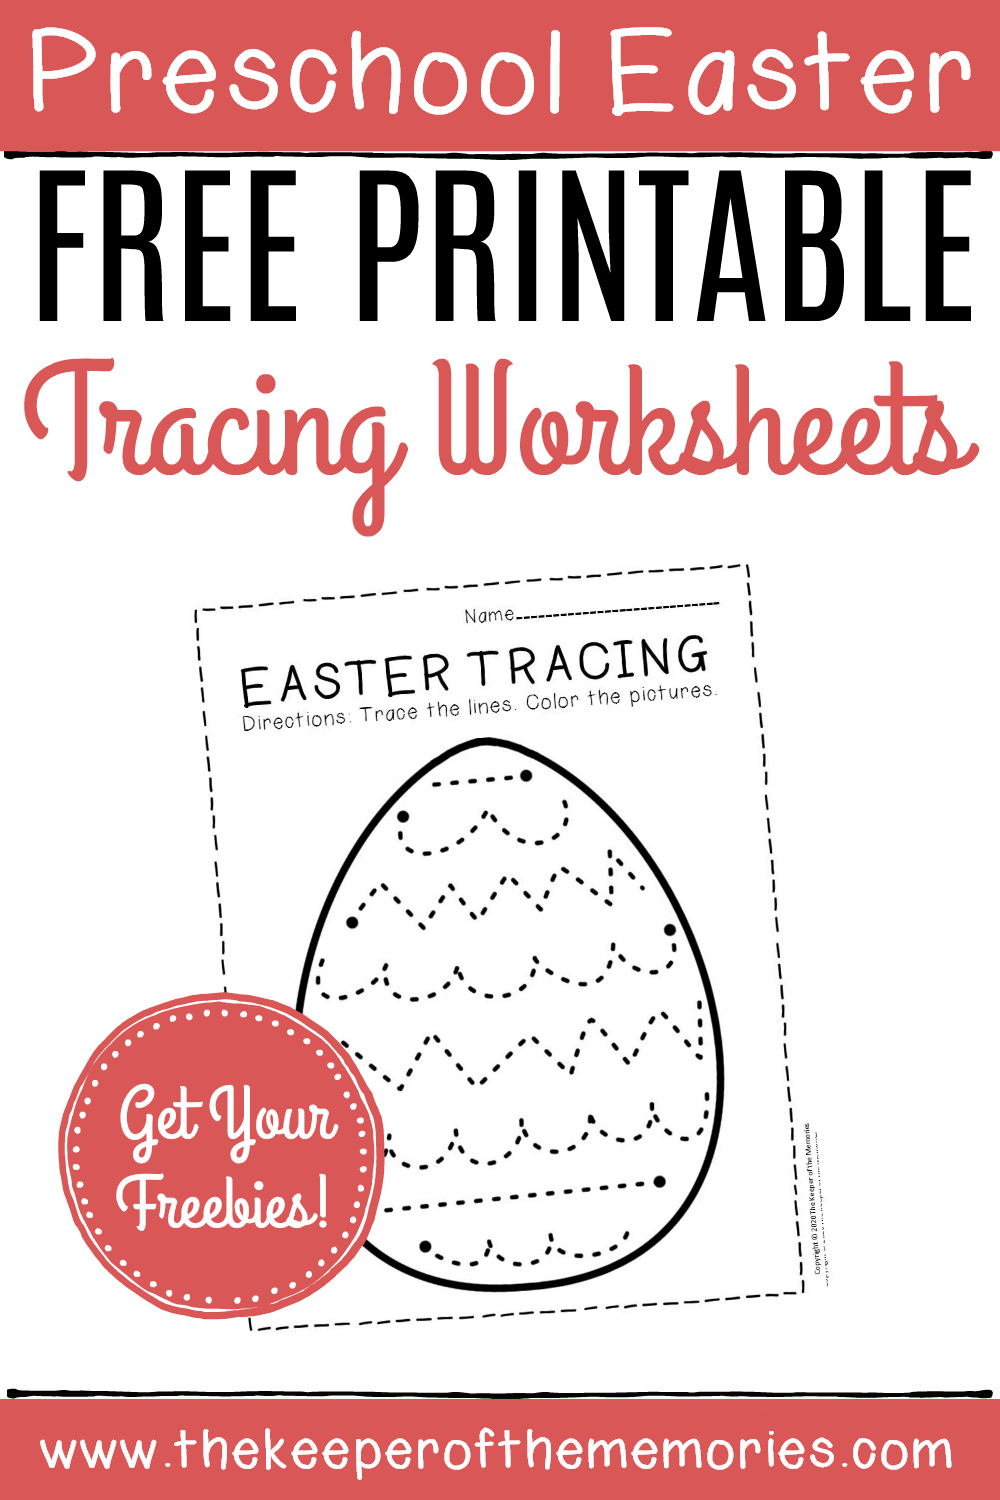 Free Printable Easter Tracing Worksheets - The Keeper Of The